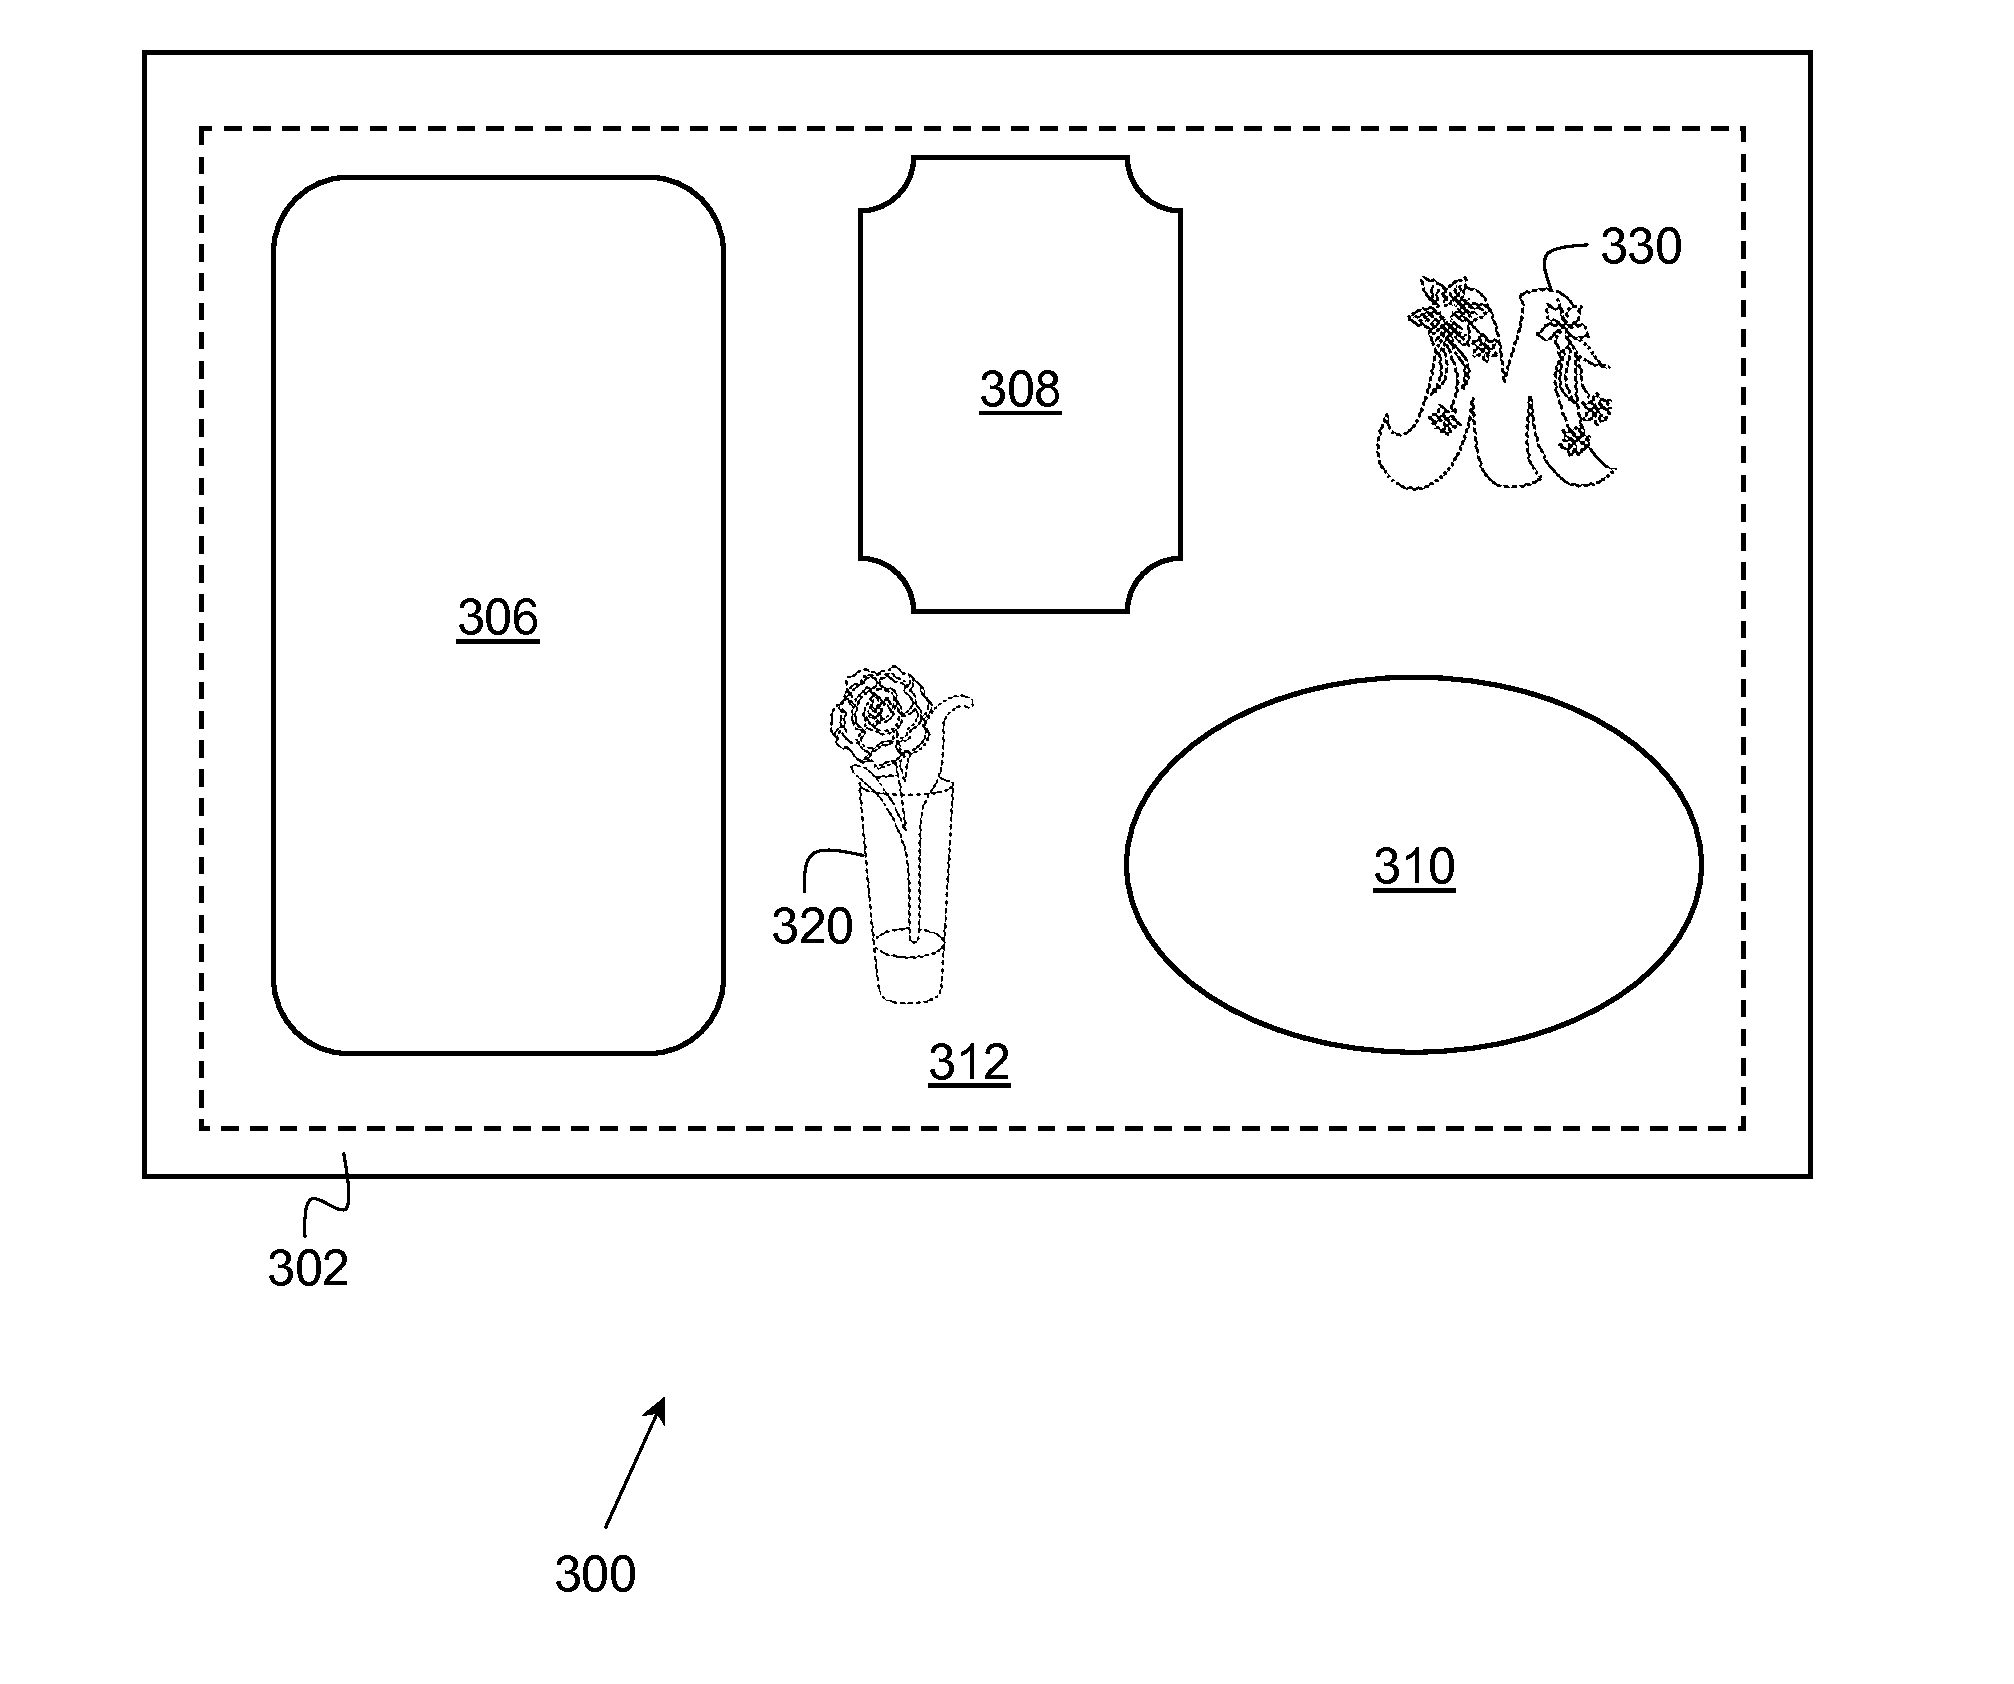 Image capture device with artistic template design